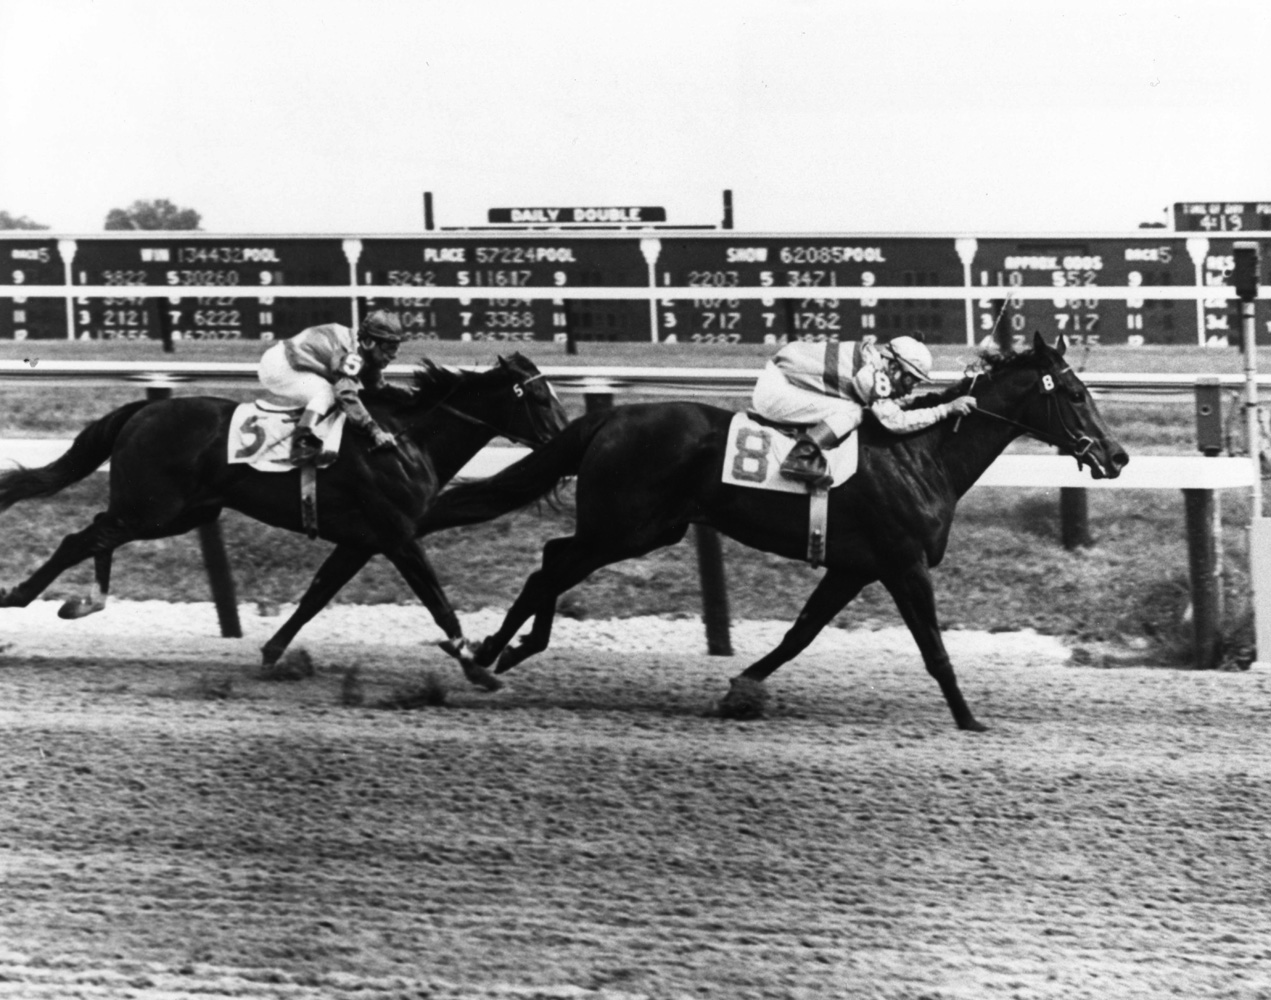 Affectionately (Ismael Valenzuela up) winning the 1962 Polly Drummond Stakes at Delaware Park (The BloodHorse/Museum Collection)